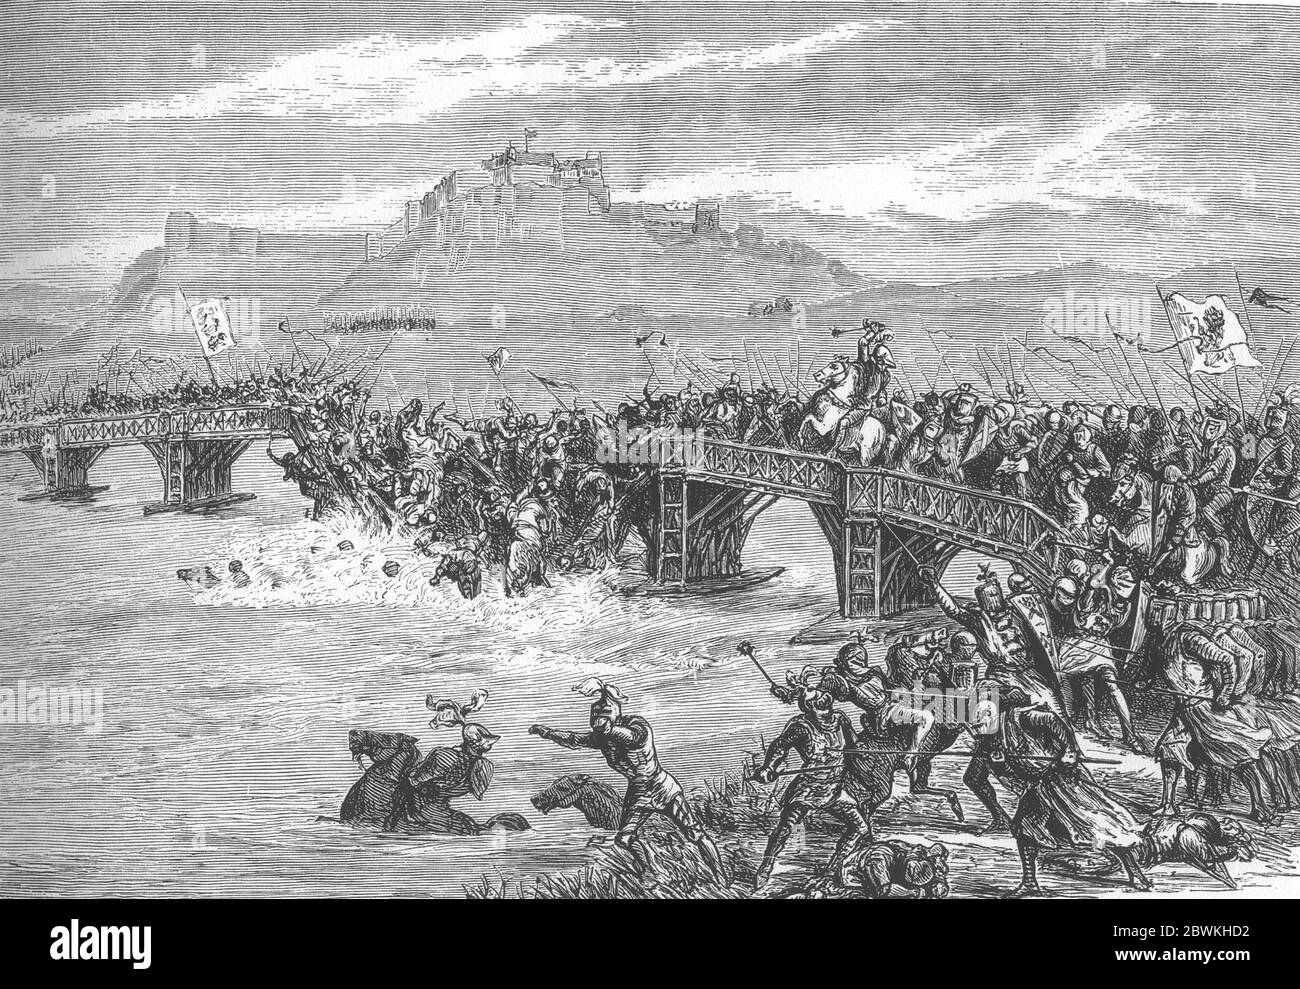 The Battle of Stirling Bridge, it was a battle of the First War of Scottish Independence on 11 September 1297. Location Private Collection Stock Photo